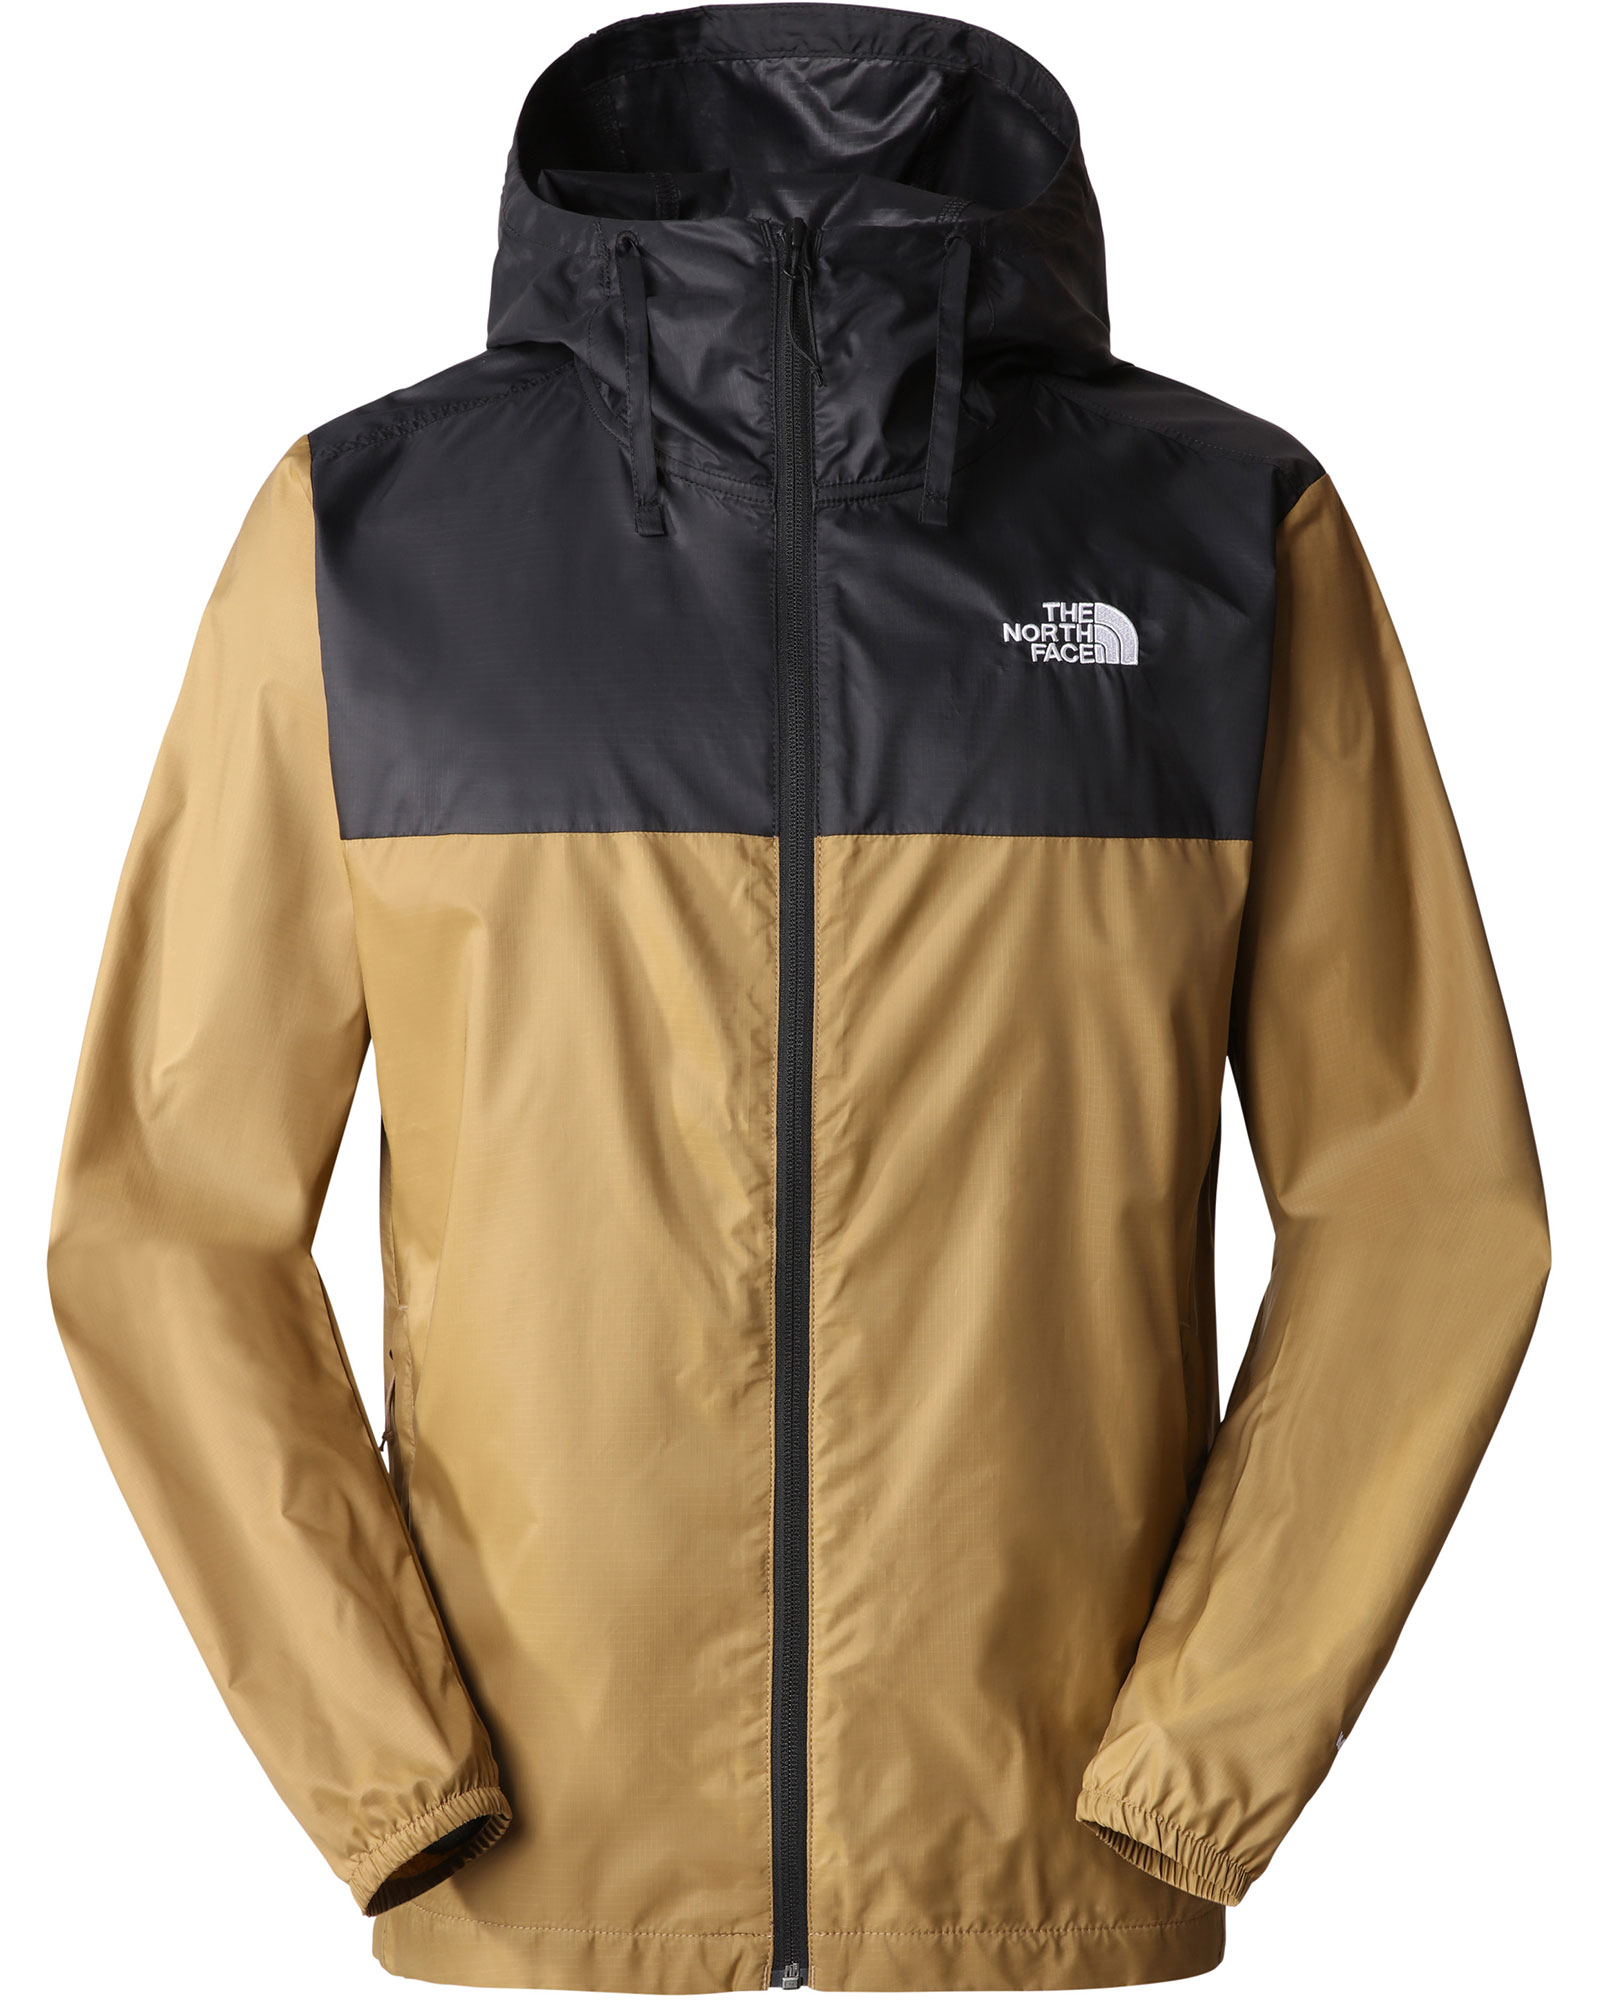 The North Face Cyclone 3 Men’s Jacket - Utility Brown S